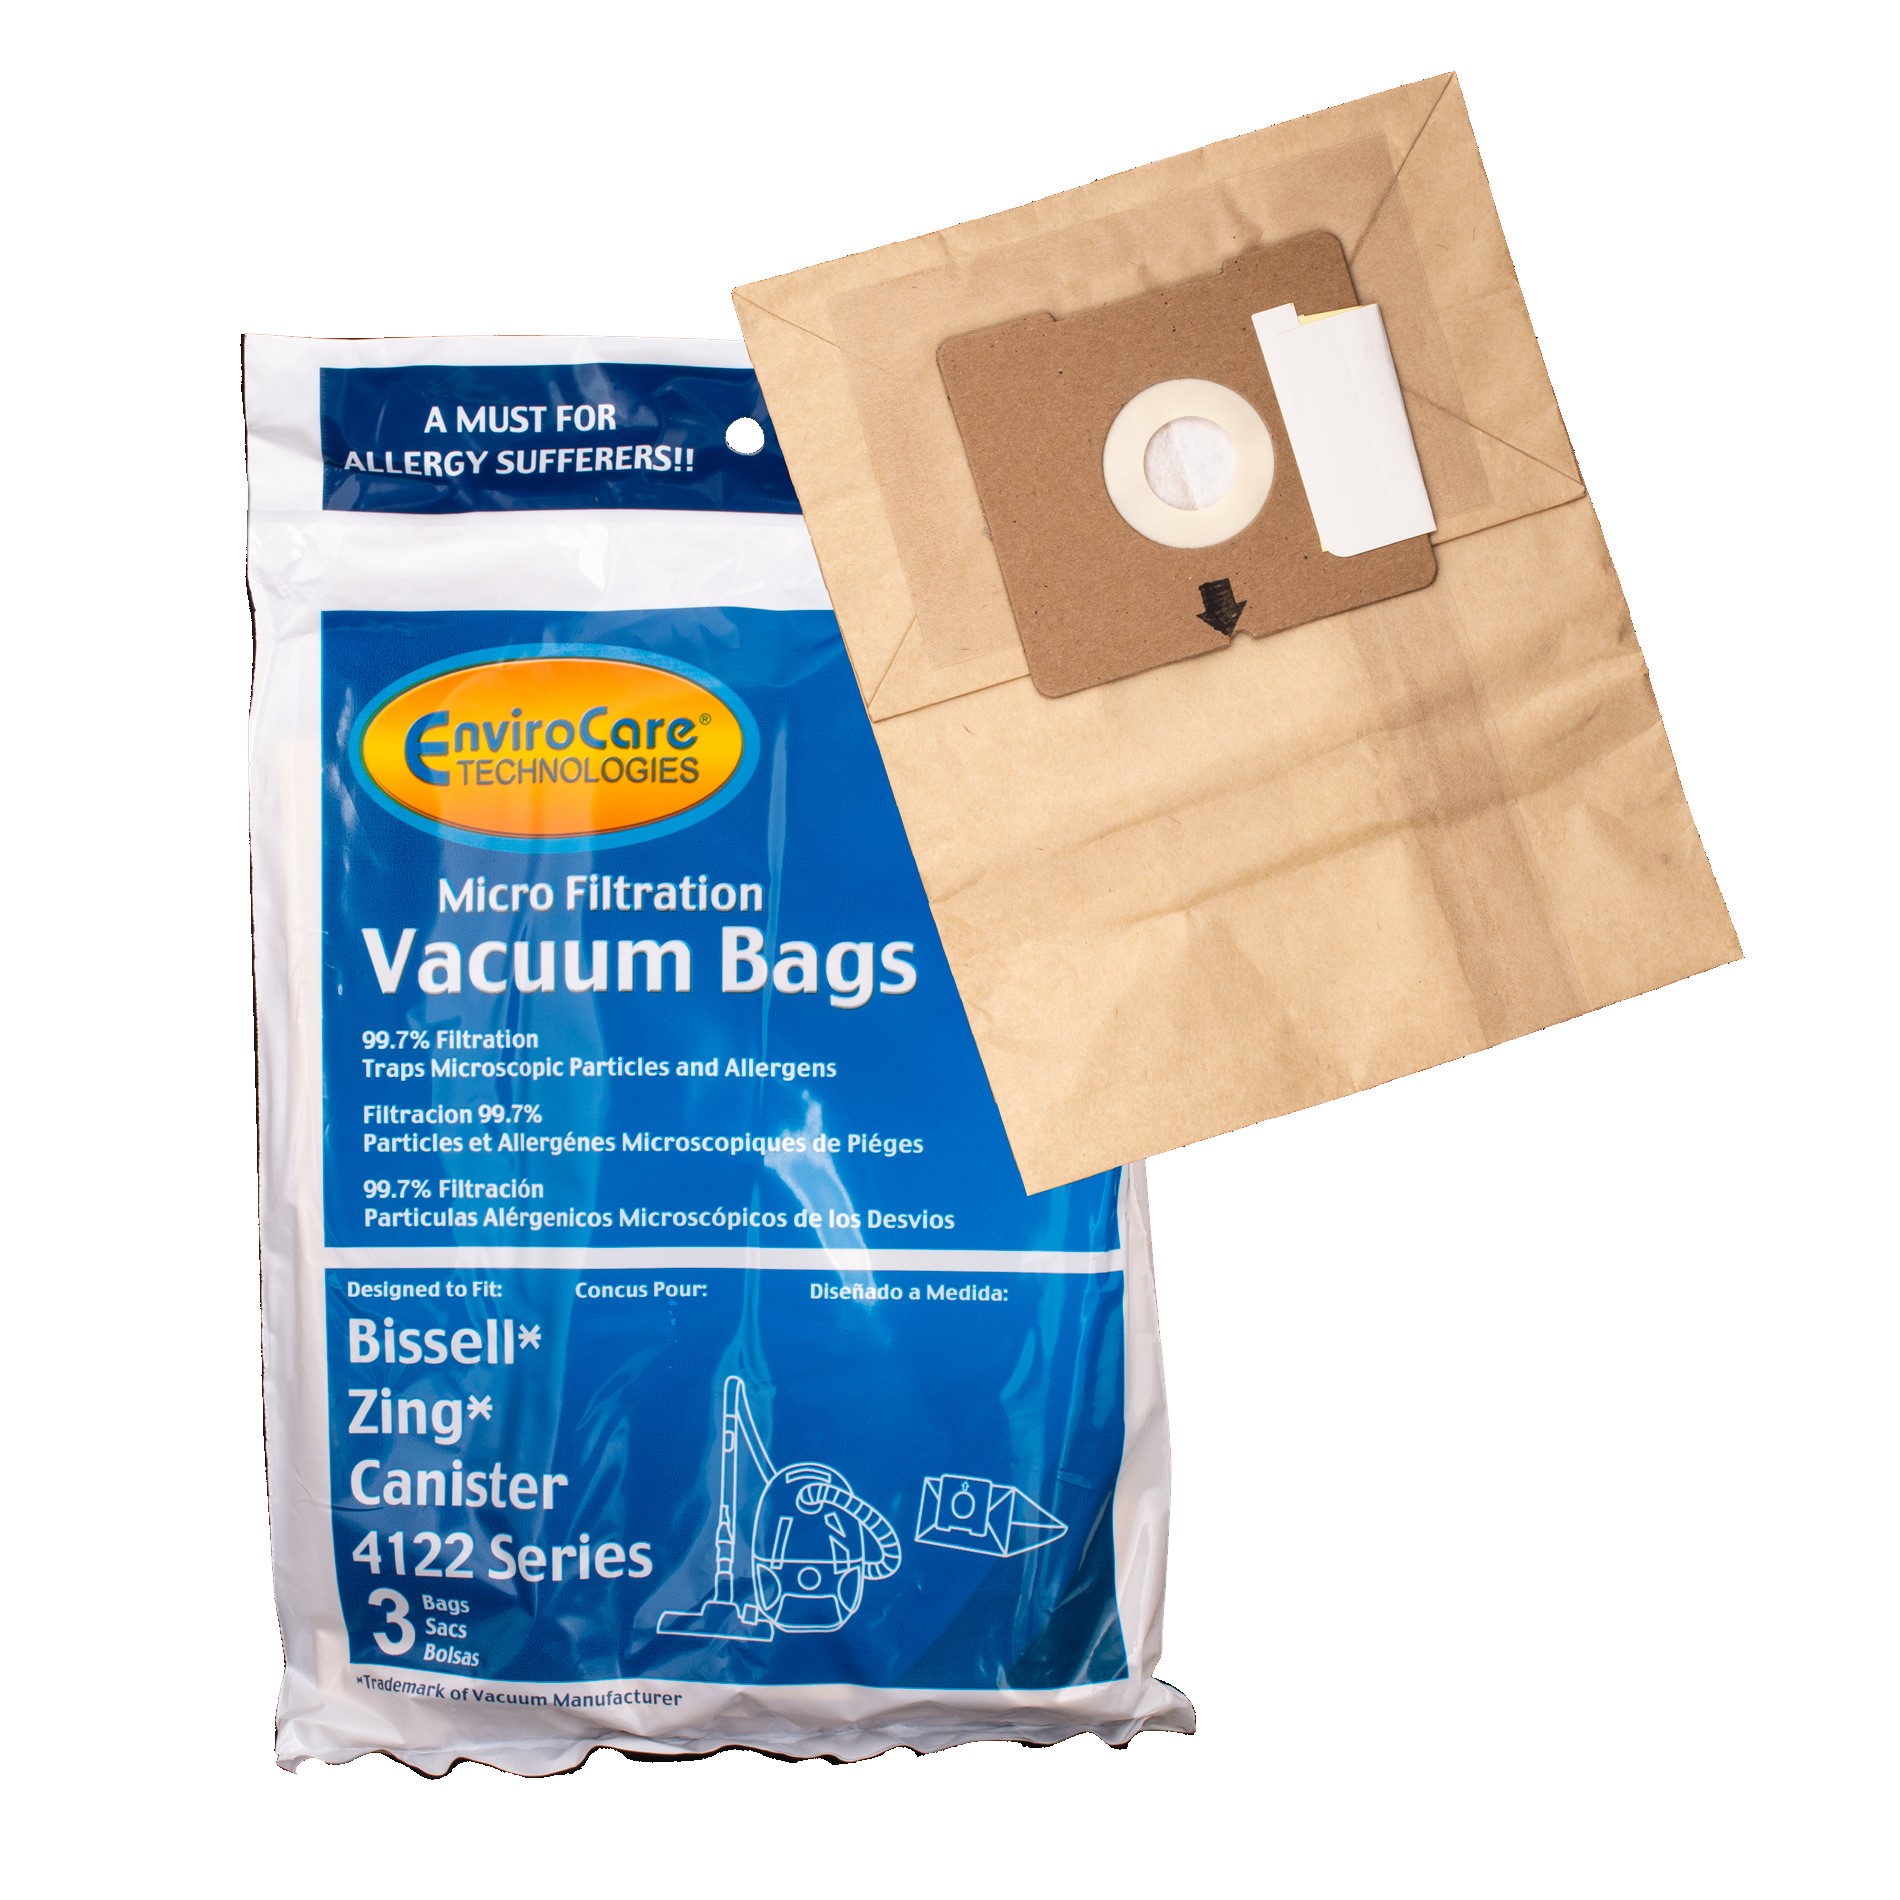 213-8425 New Series # 2138425 Bissell Allergen Vacuum Bag 6-bags for Zing 4122 